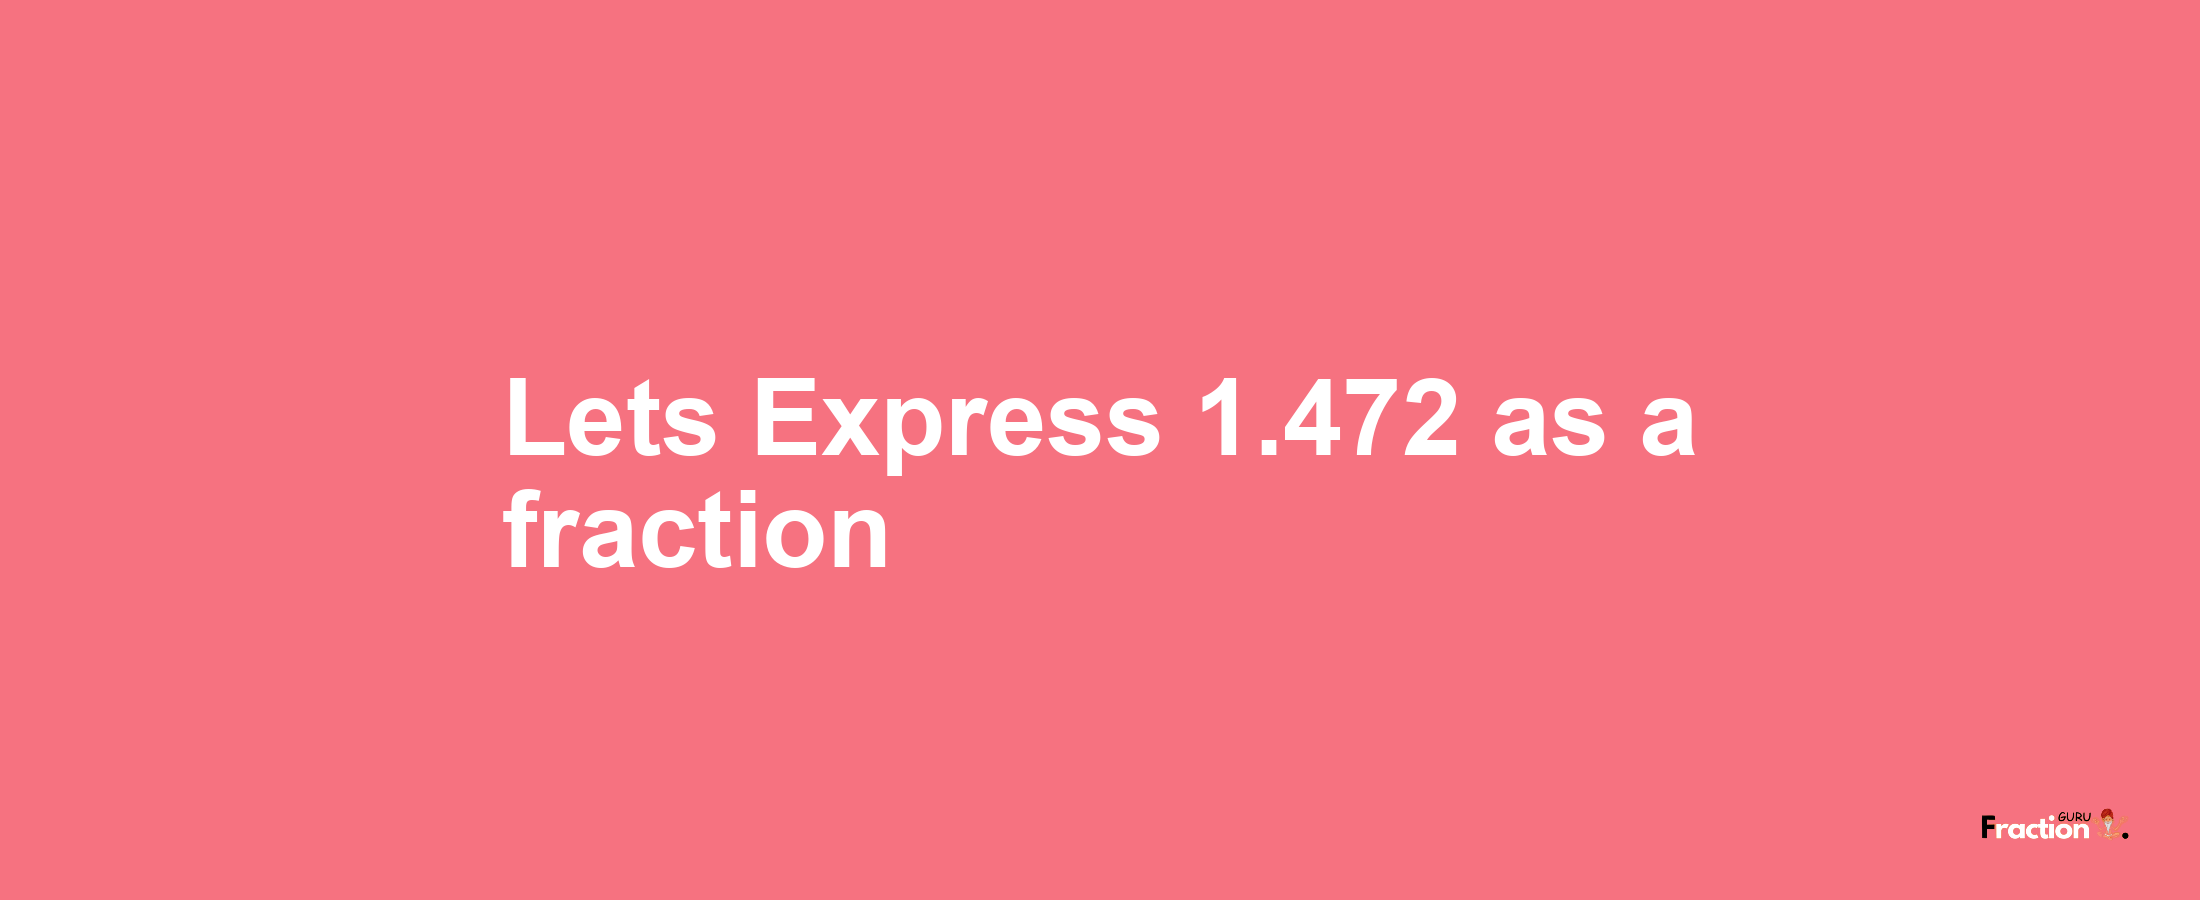 Lets Express 1.472 as afraction